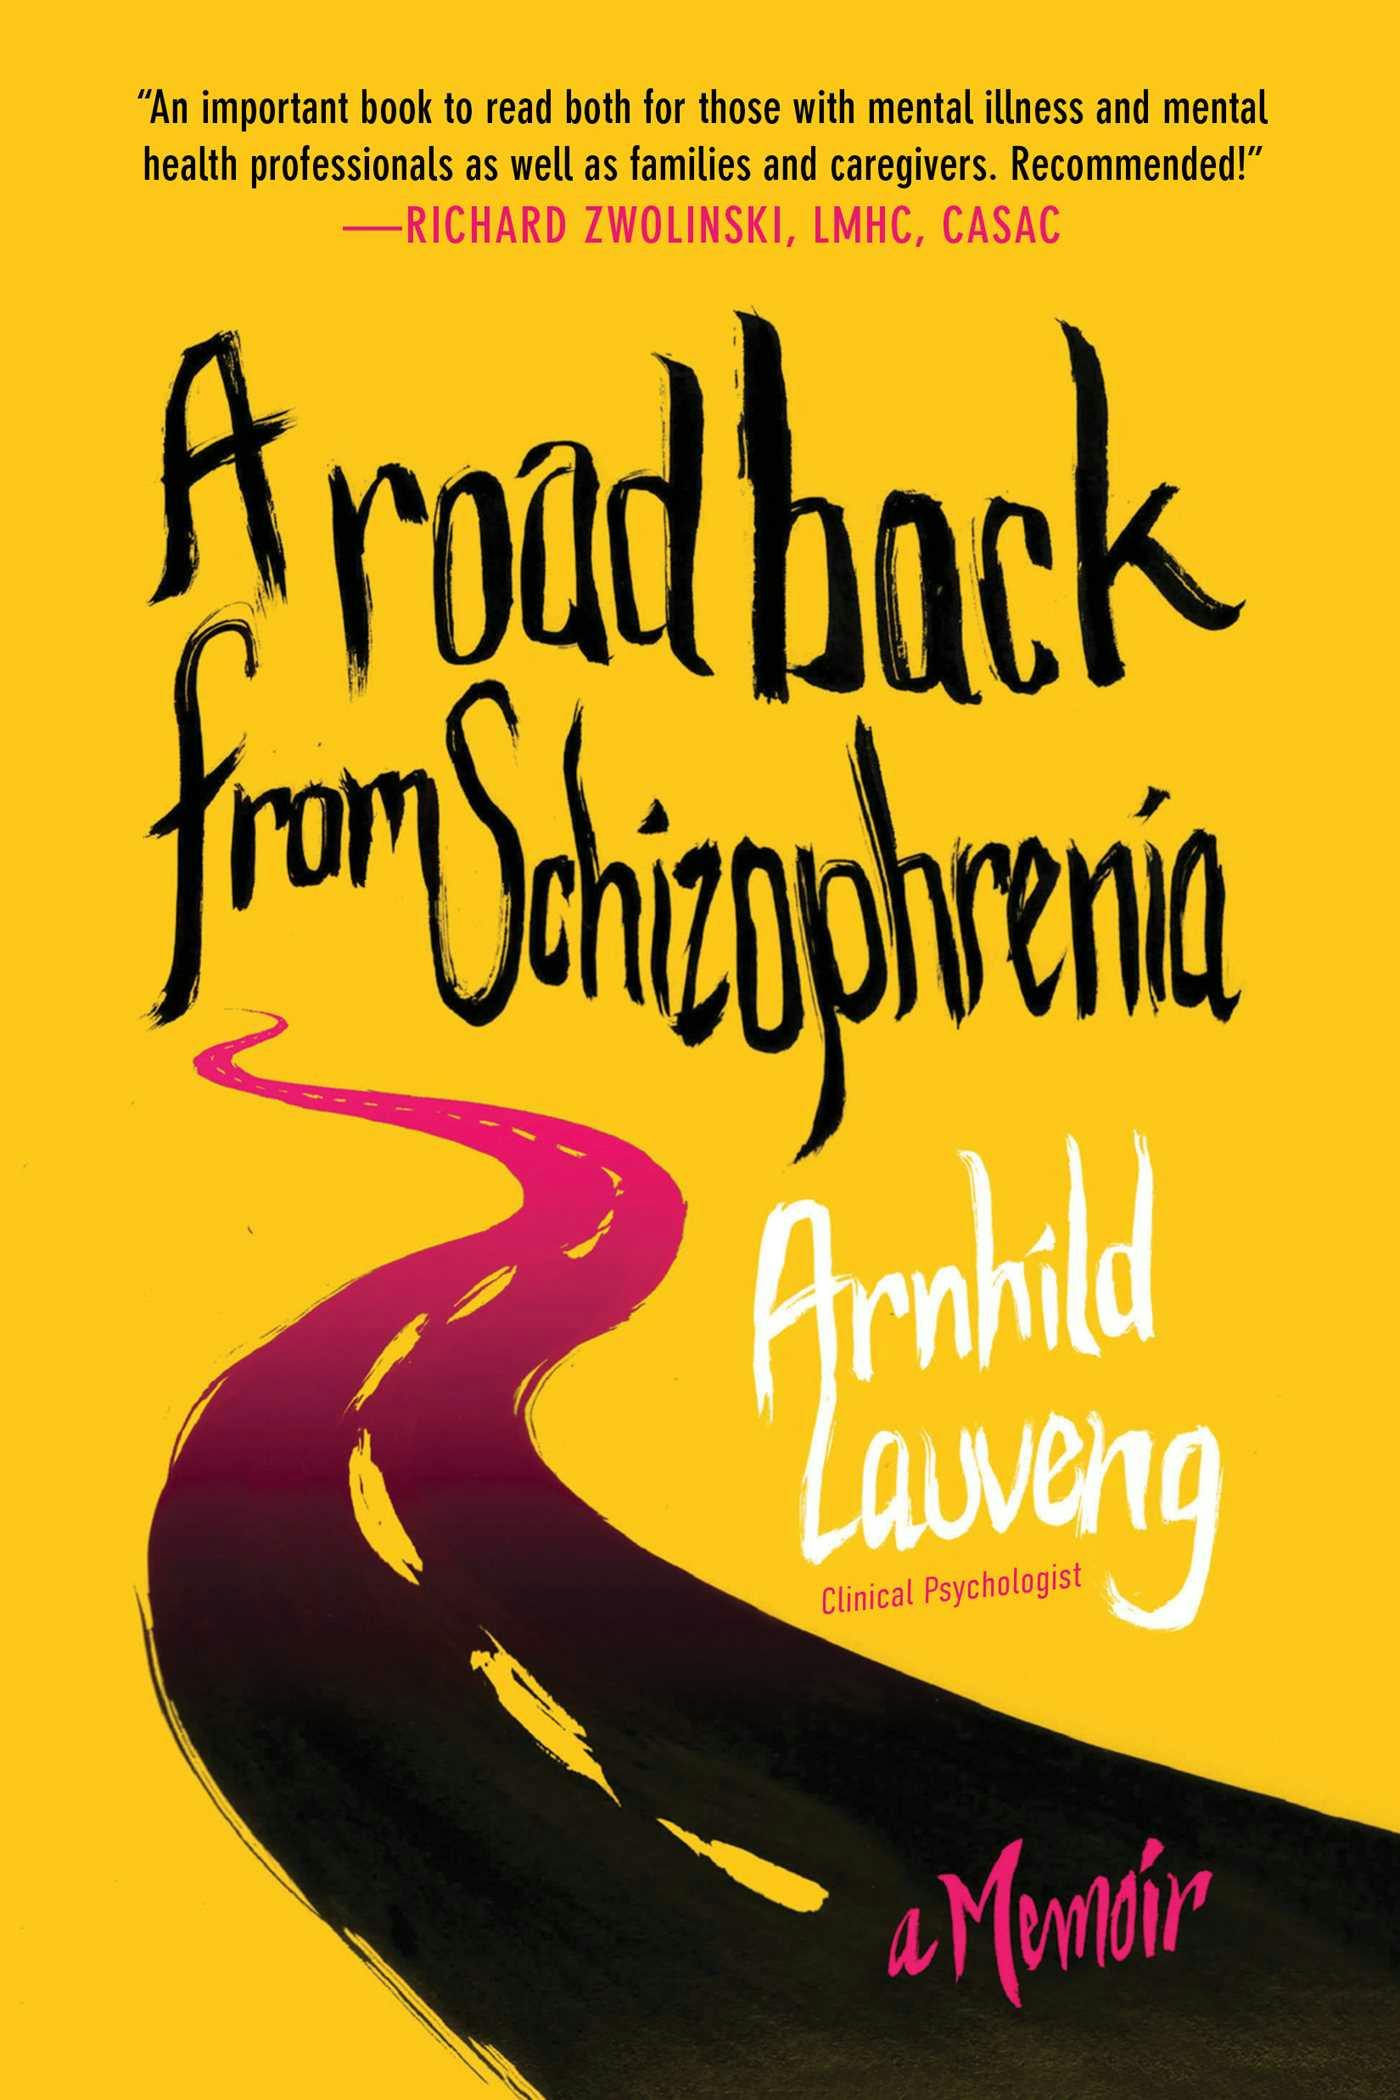 A Road Back from Schizophrenia: A Memoir - undefined